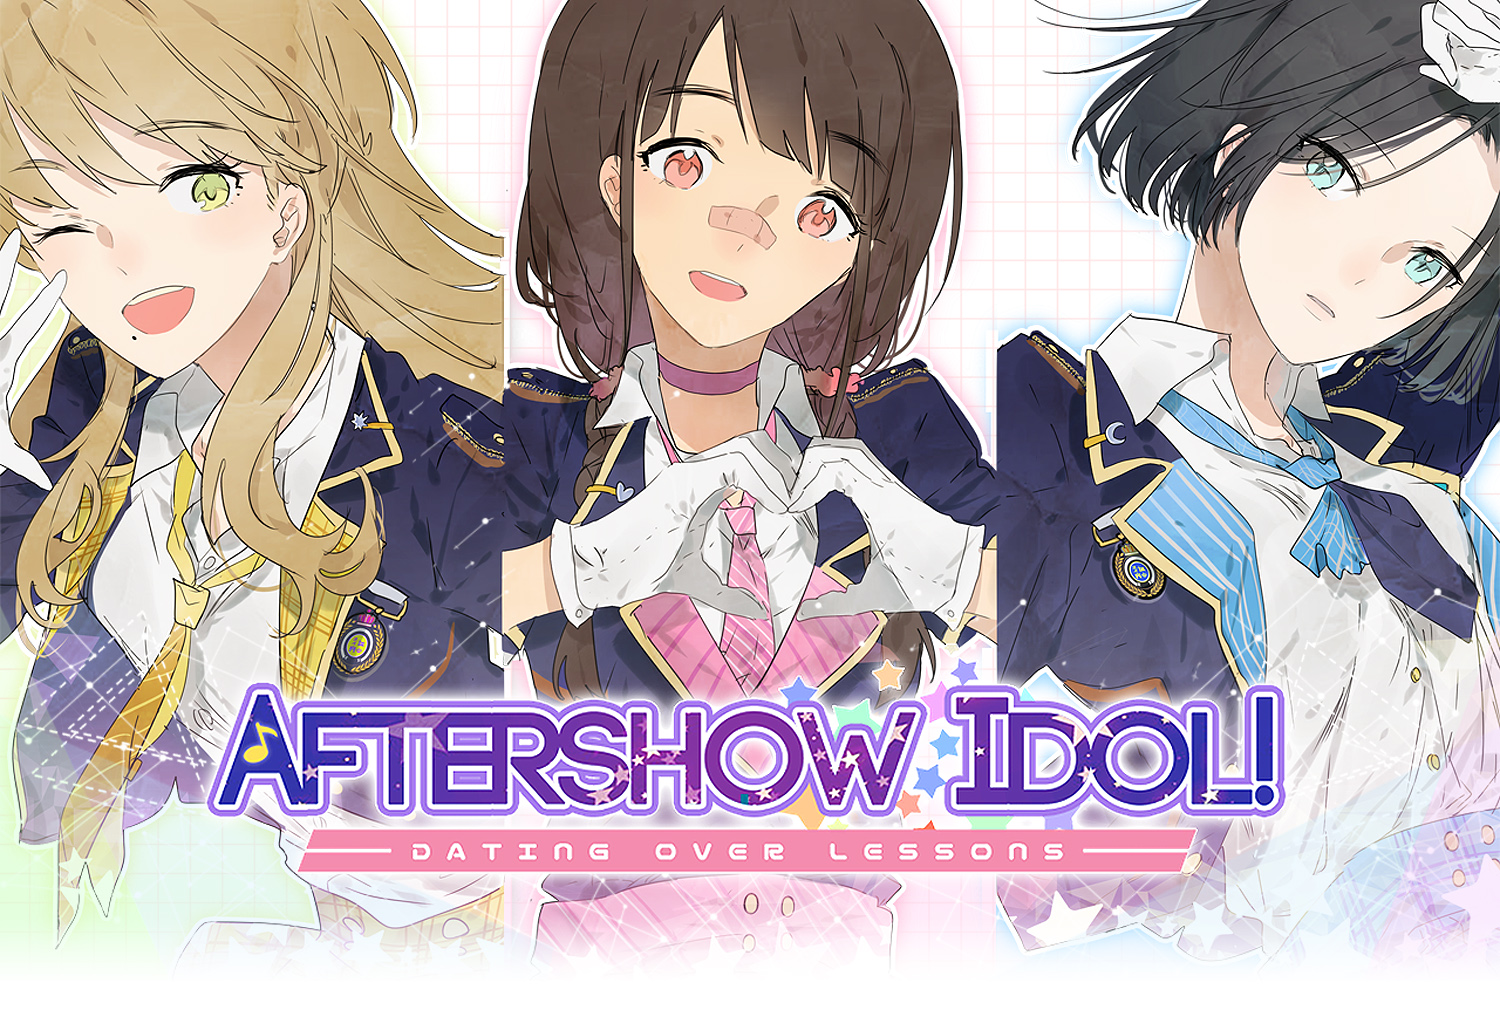 Aftershow Idol! Dating over Lessons